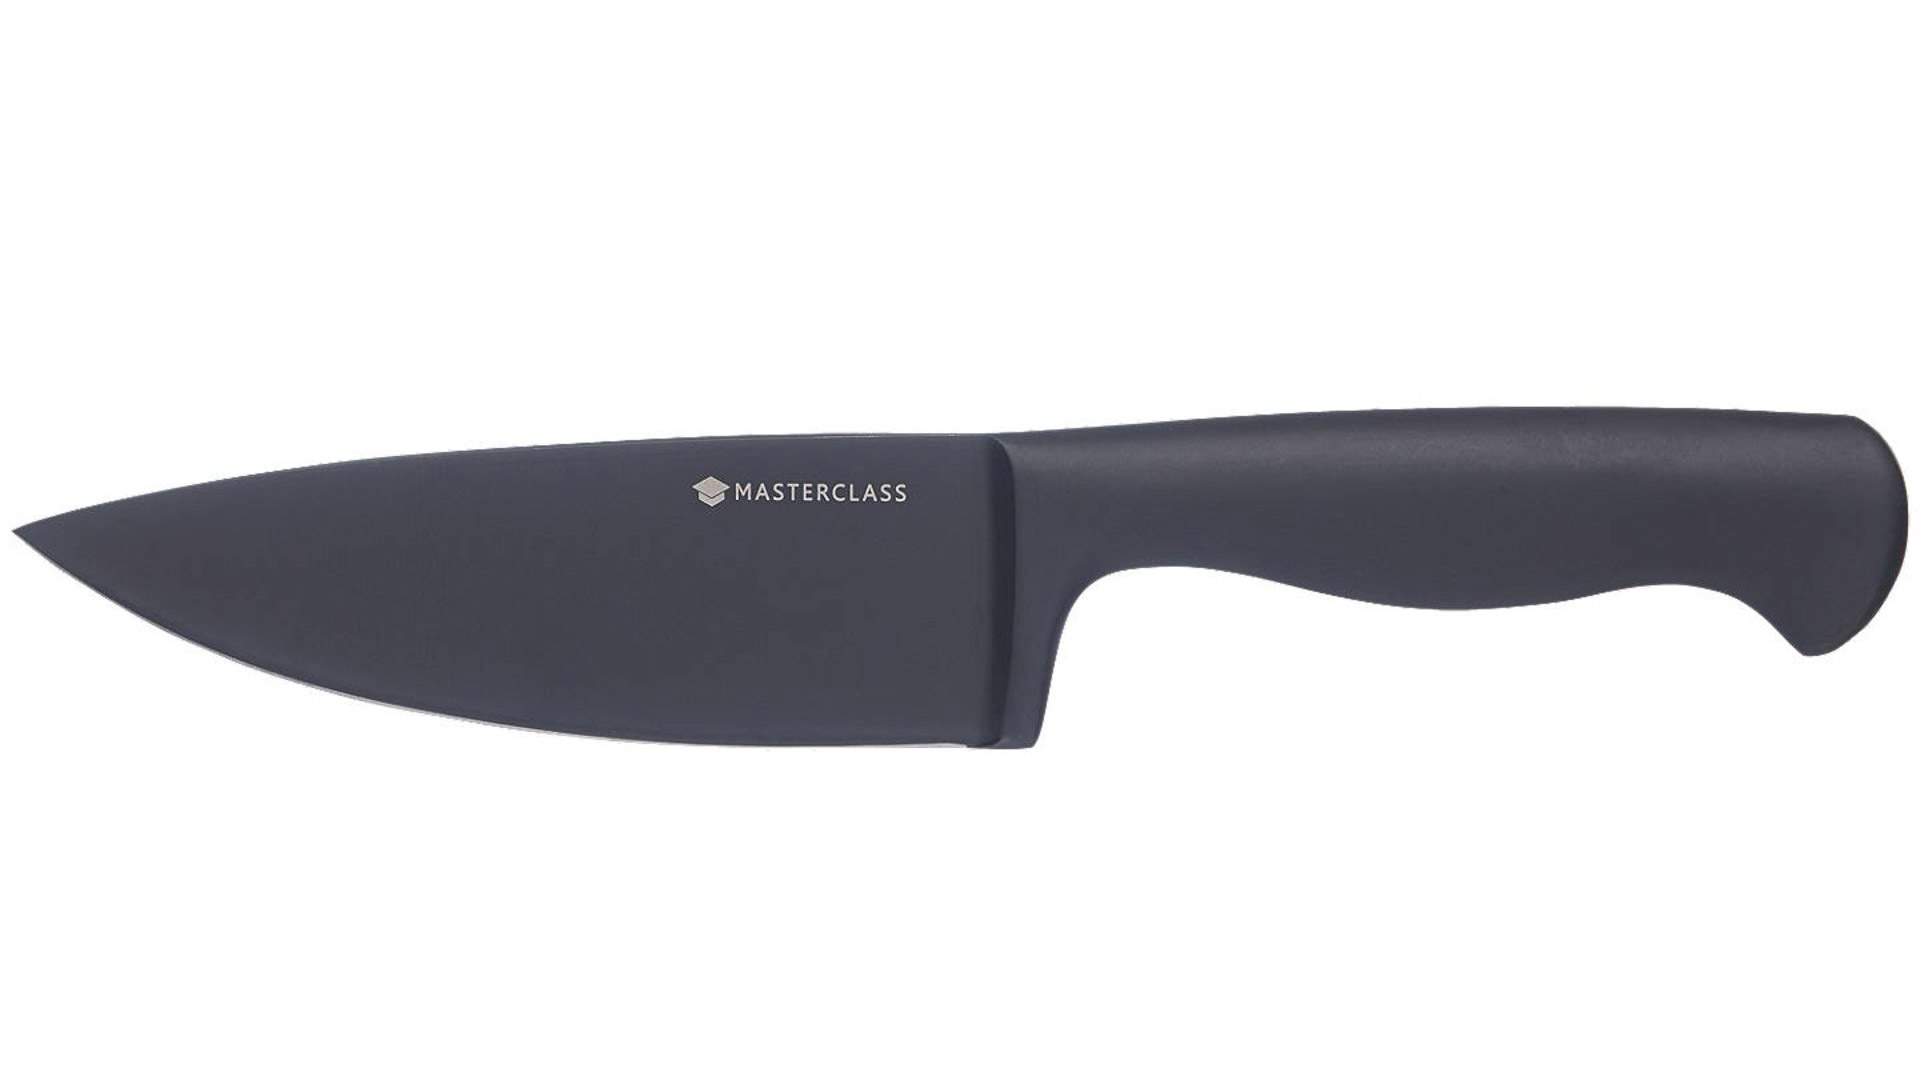 Cookistry's Kitchen Gadget and Food Reviews: Sabatier Edgekeeper Self  Sharpening Knives